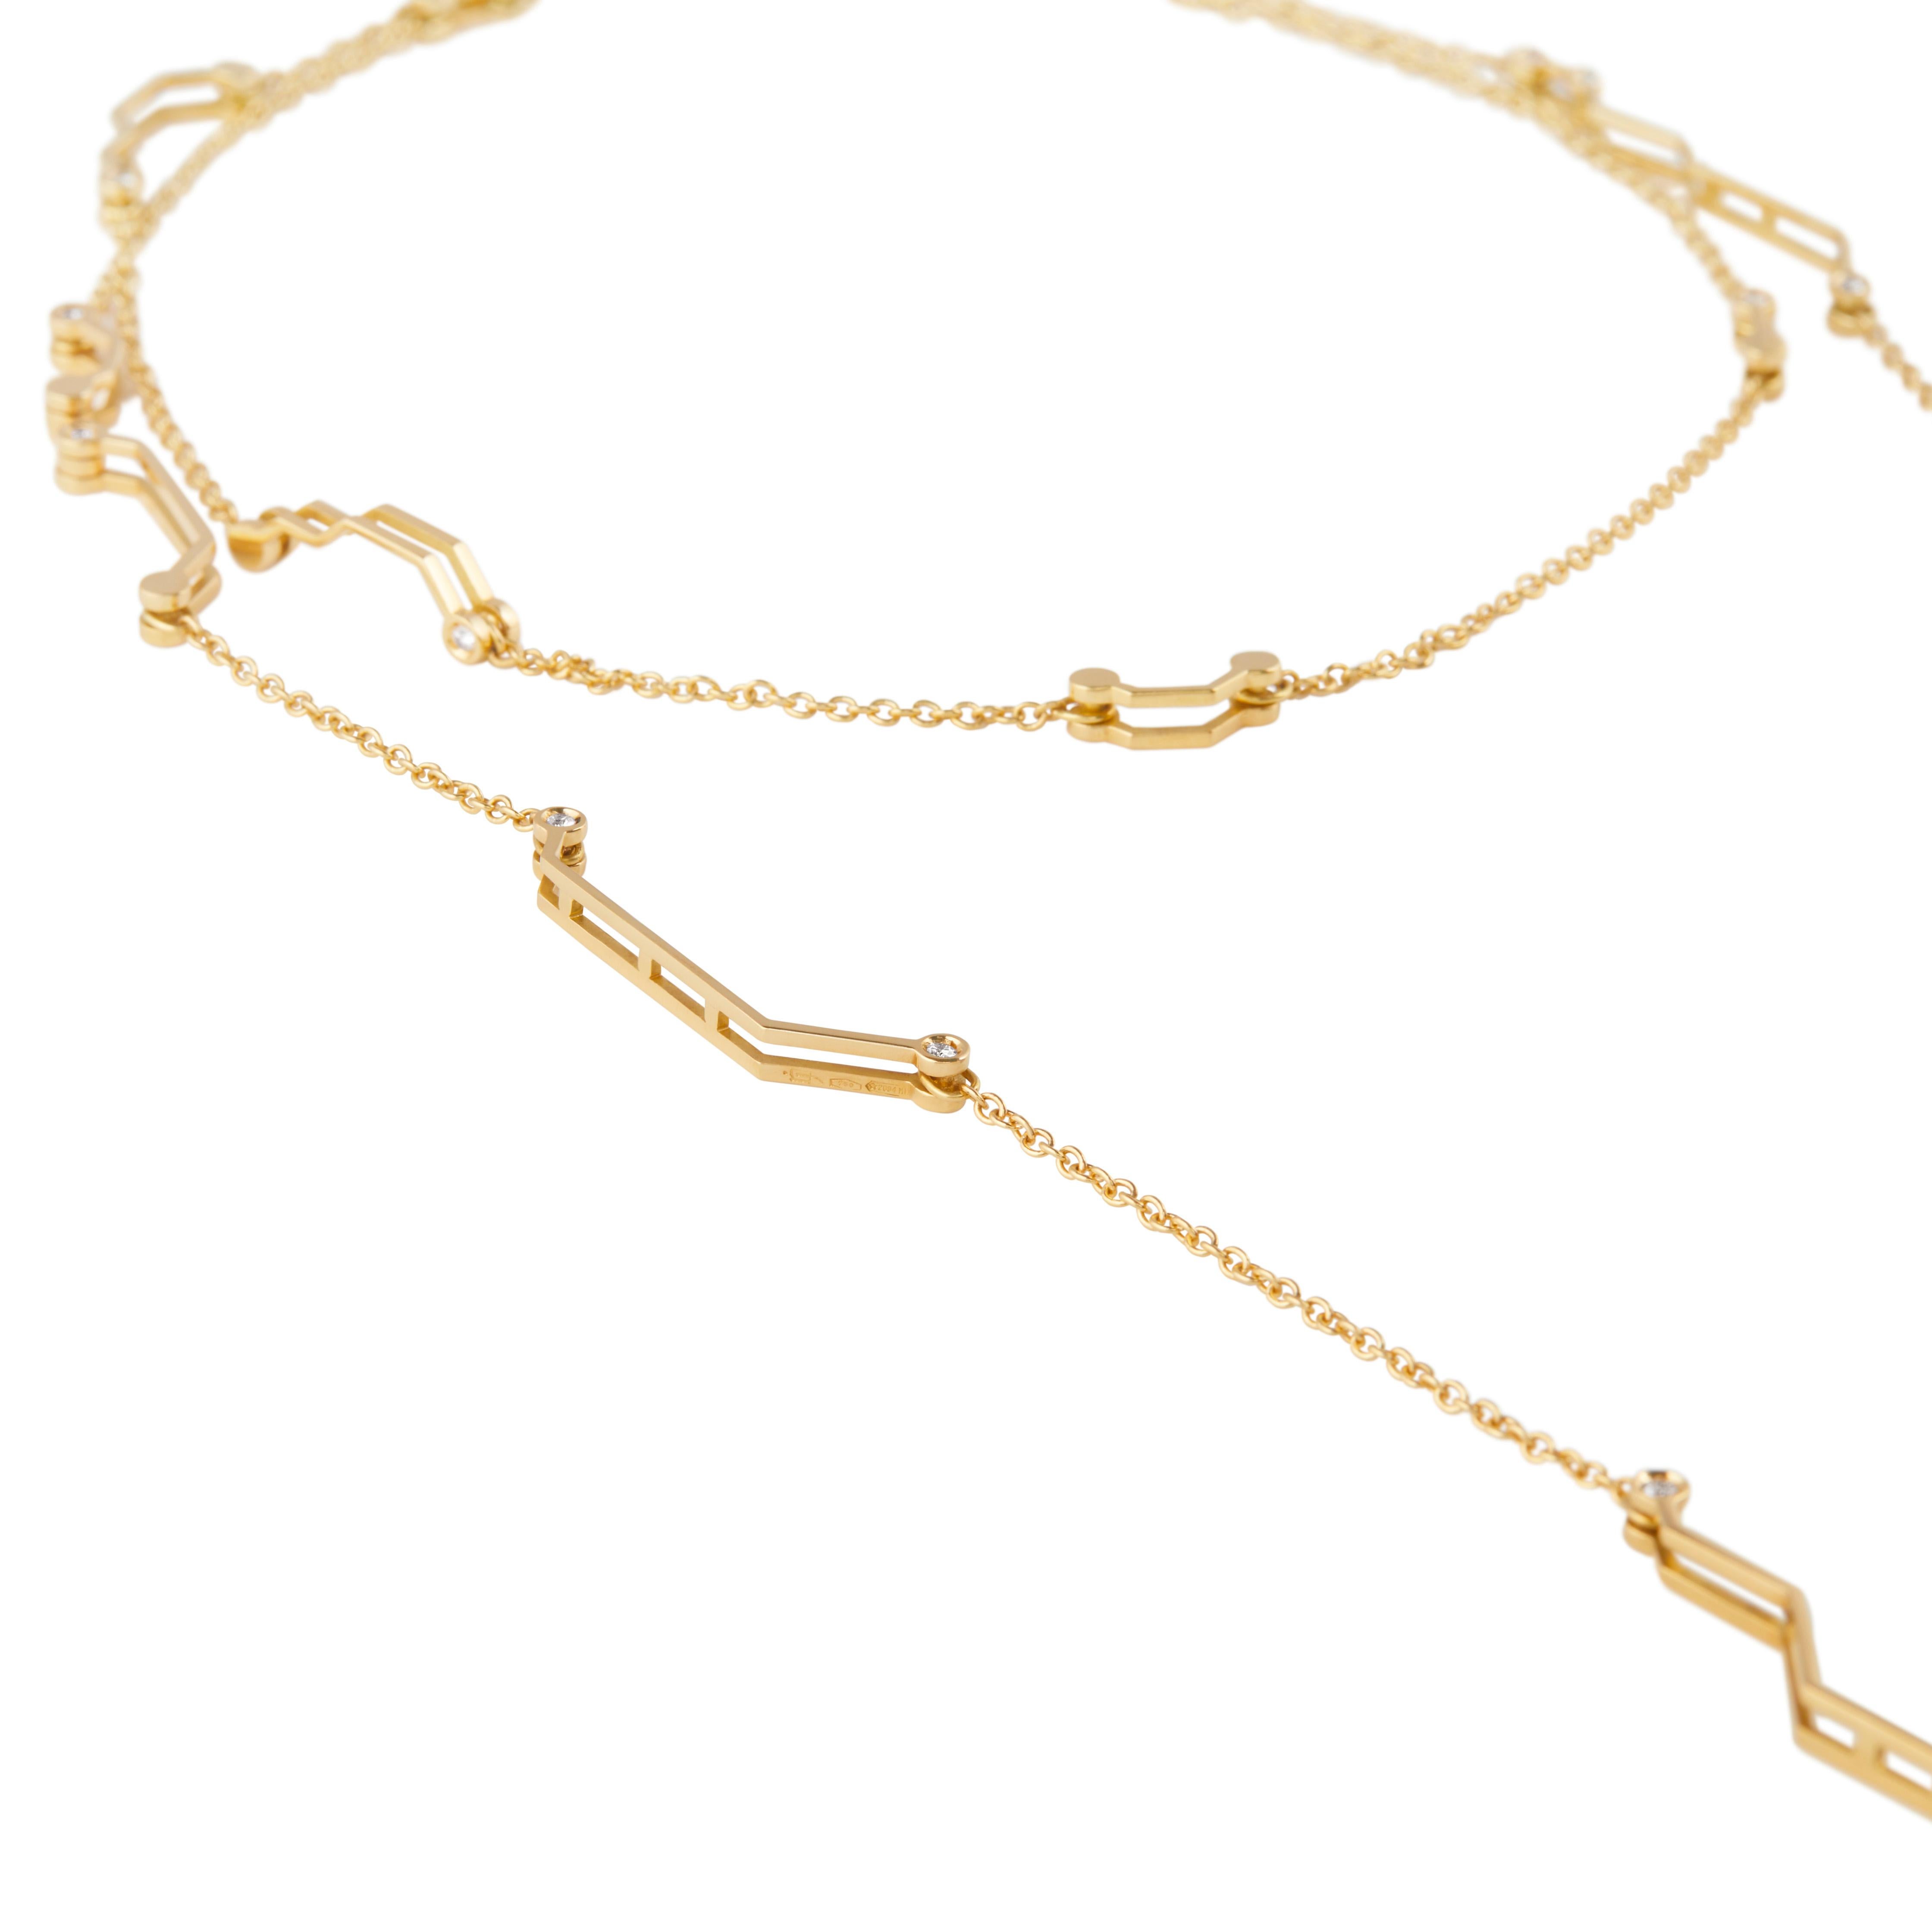 Made by hand in Nathalie Jean’s Milan studio, Circuit articulated Chain is in 18-karat yellow gold and diamonds (carat total weight 0,468). Printed circuit boards change scale and become precious. As if by magic, copper is transmuted into gold.